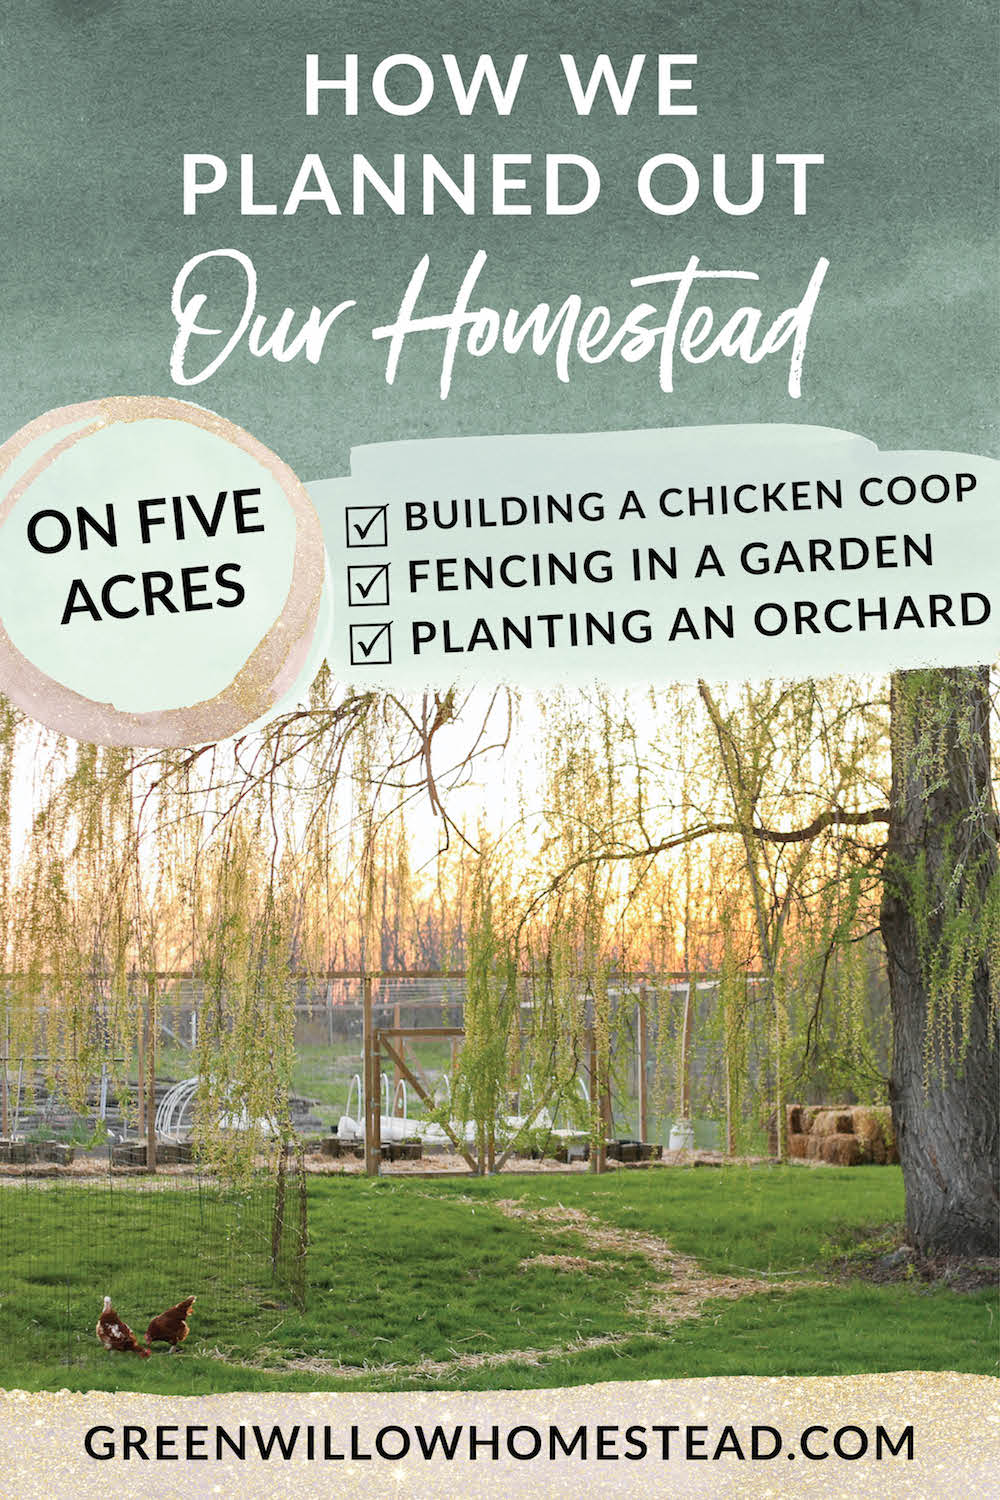 How we planned out our homestead on five acres